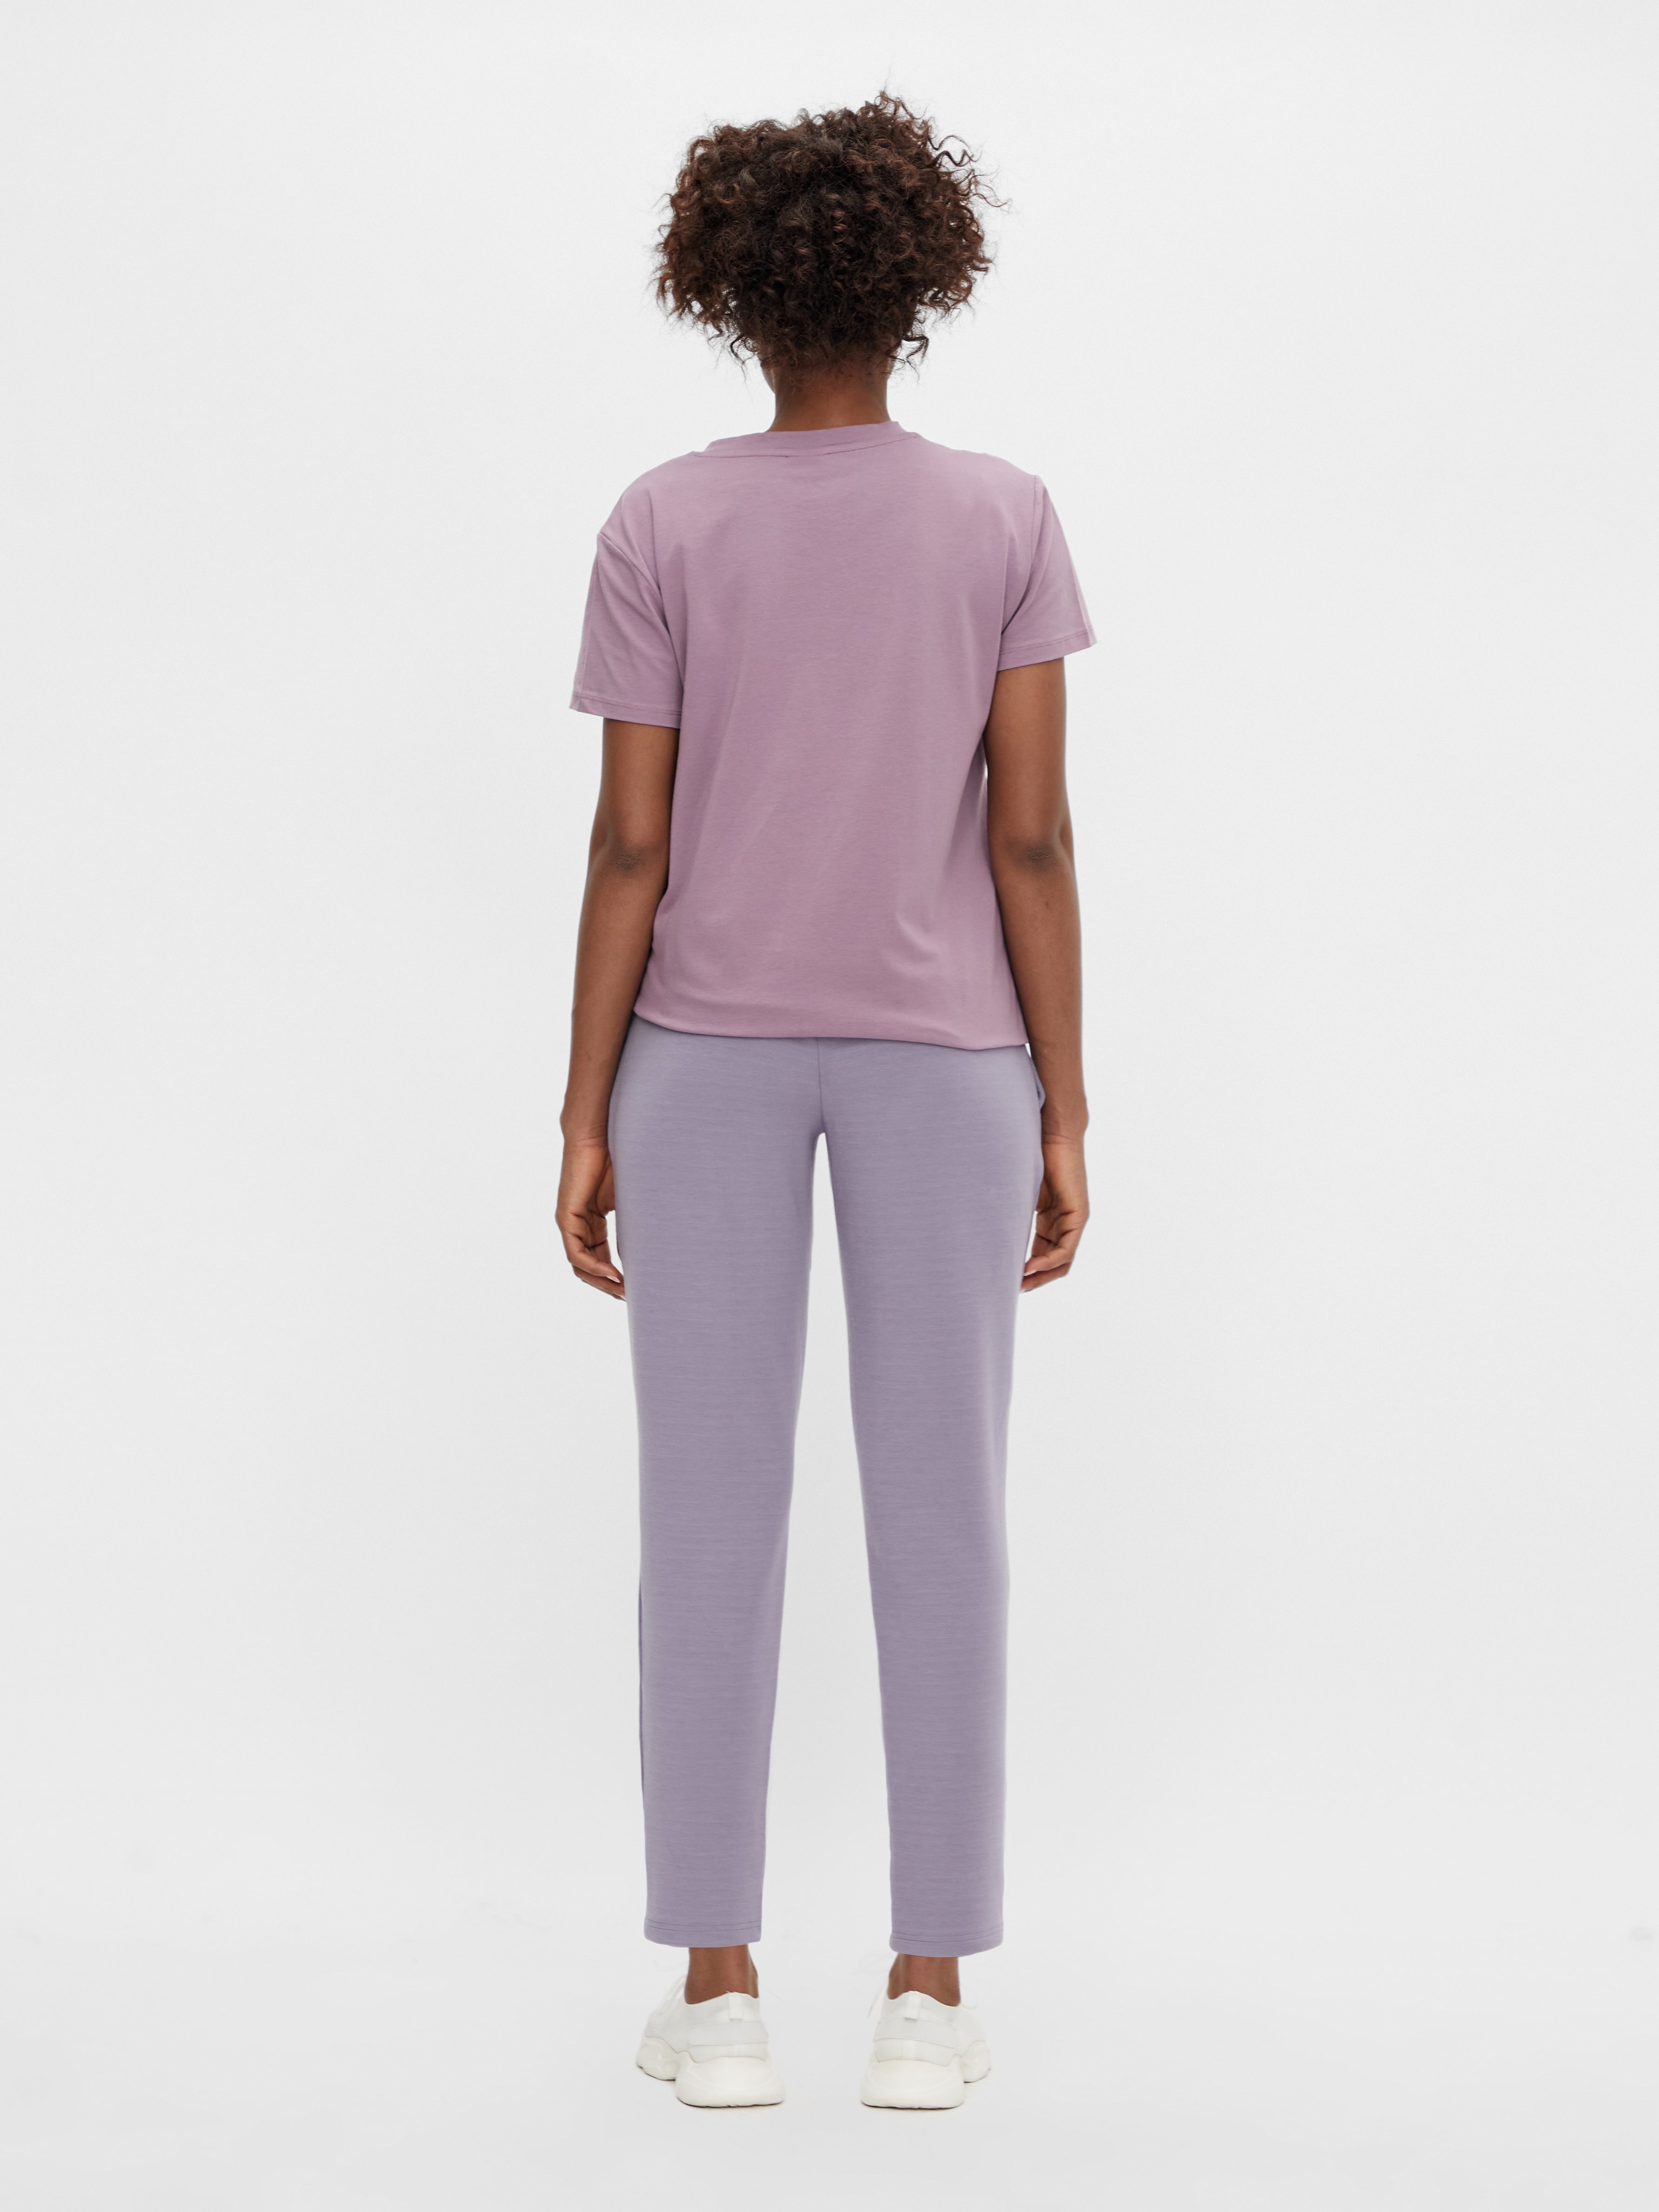 Buy Rose Gold Track Pants for Women by Outryt Sport Online | Ajio.com